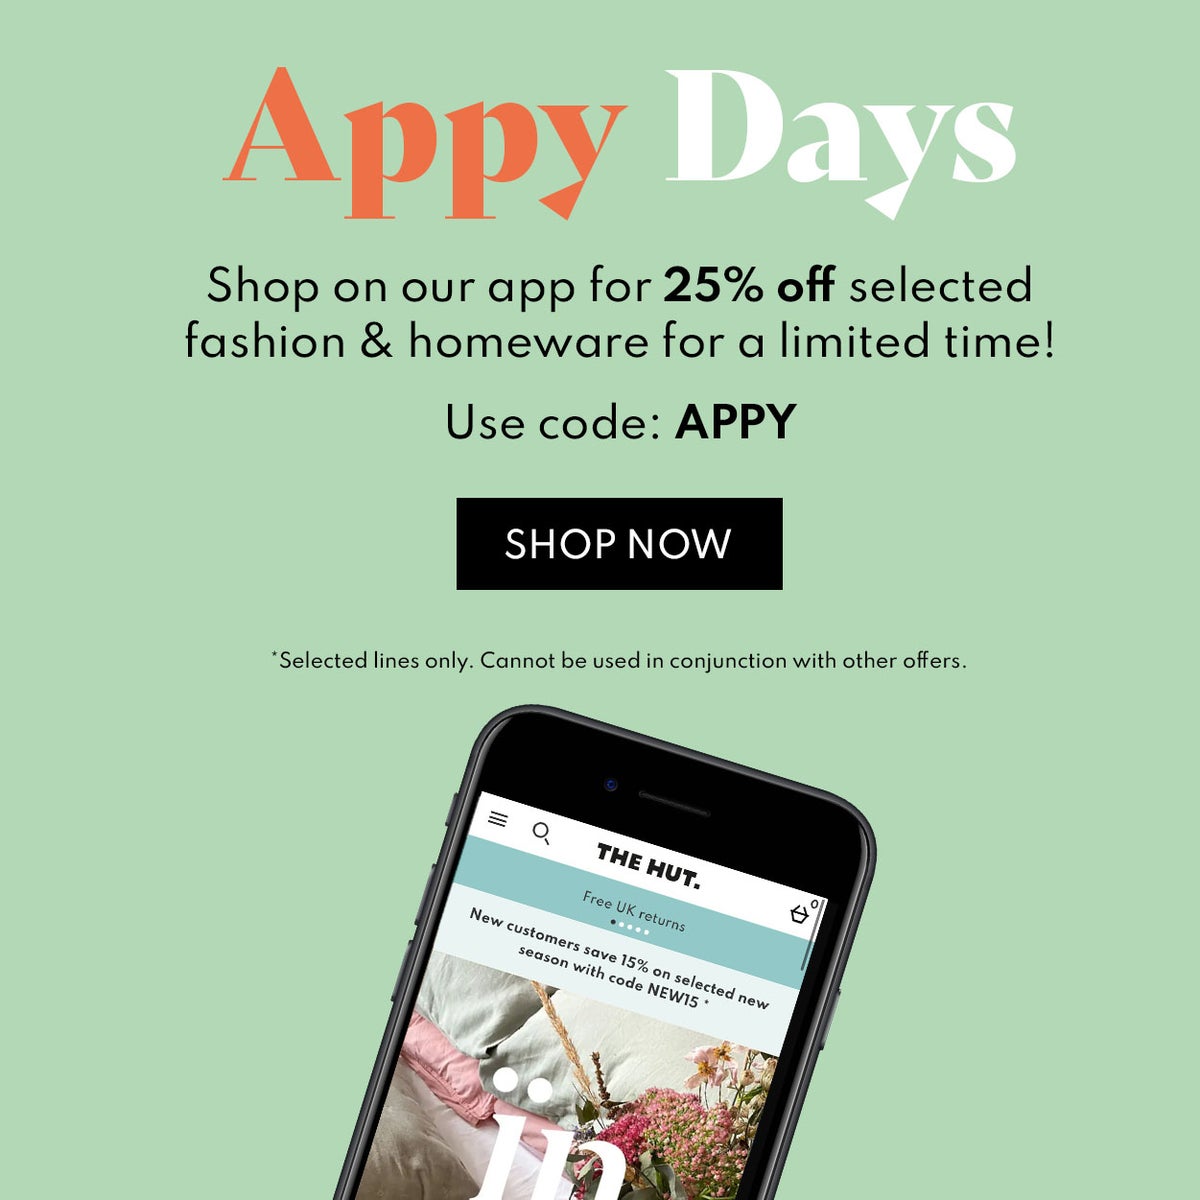 Use code APPY for 25% off selected fashion and homeware